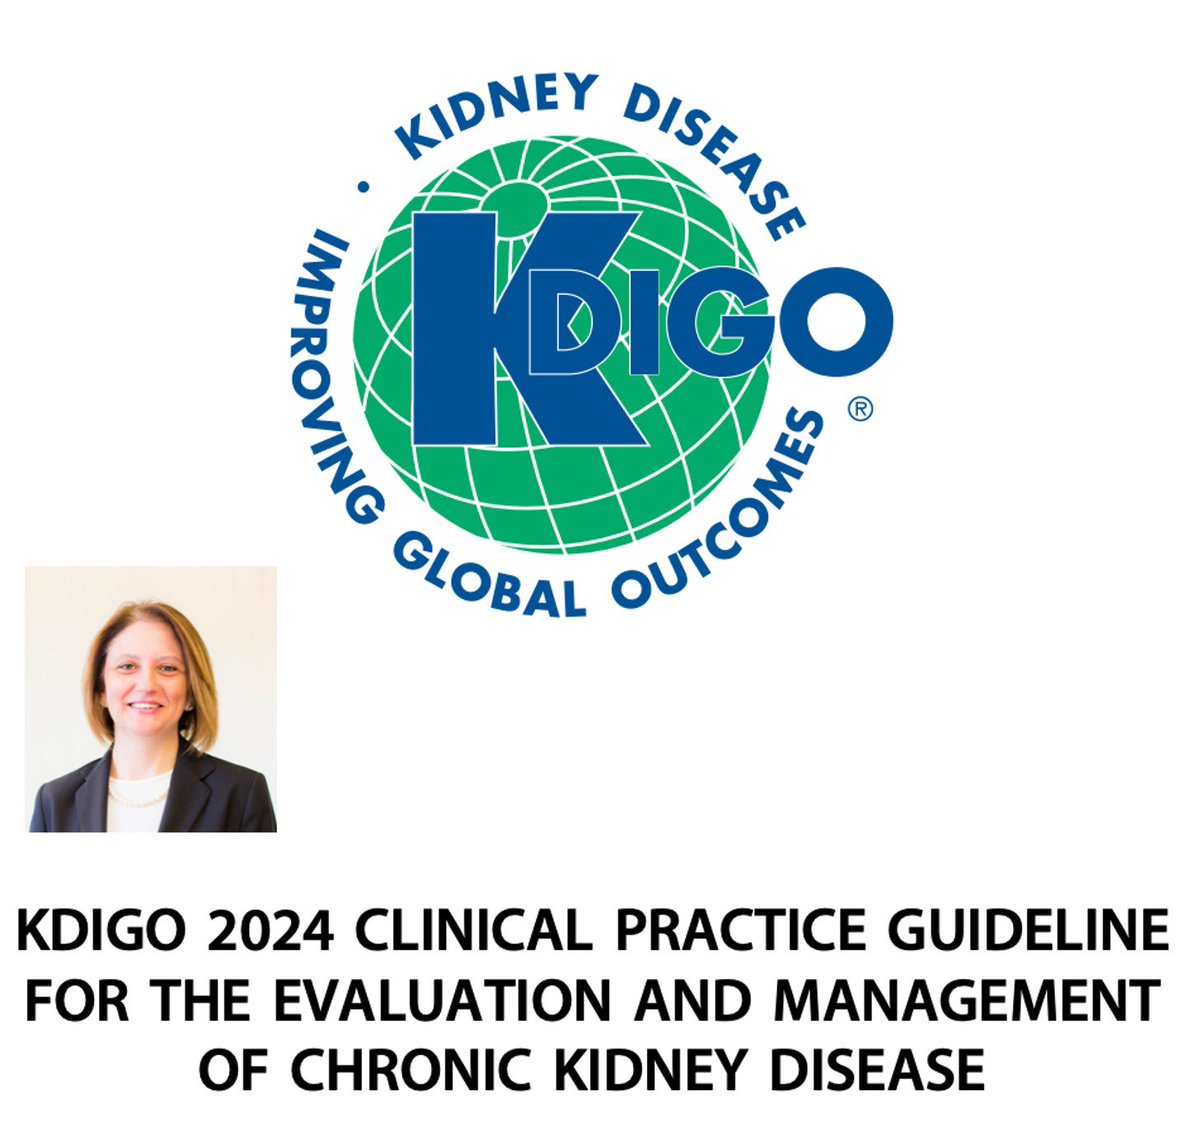 Our Editor in Chief, Prof. Dr. Rümeyza Kazancıoğlu, has been part of the 'Work Group' for the 'KDIGO 2024 Clinical Practice Guideline for the Evaluation and Management of Chronic Kidney Disease,' which has now been published. 📚‼️